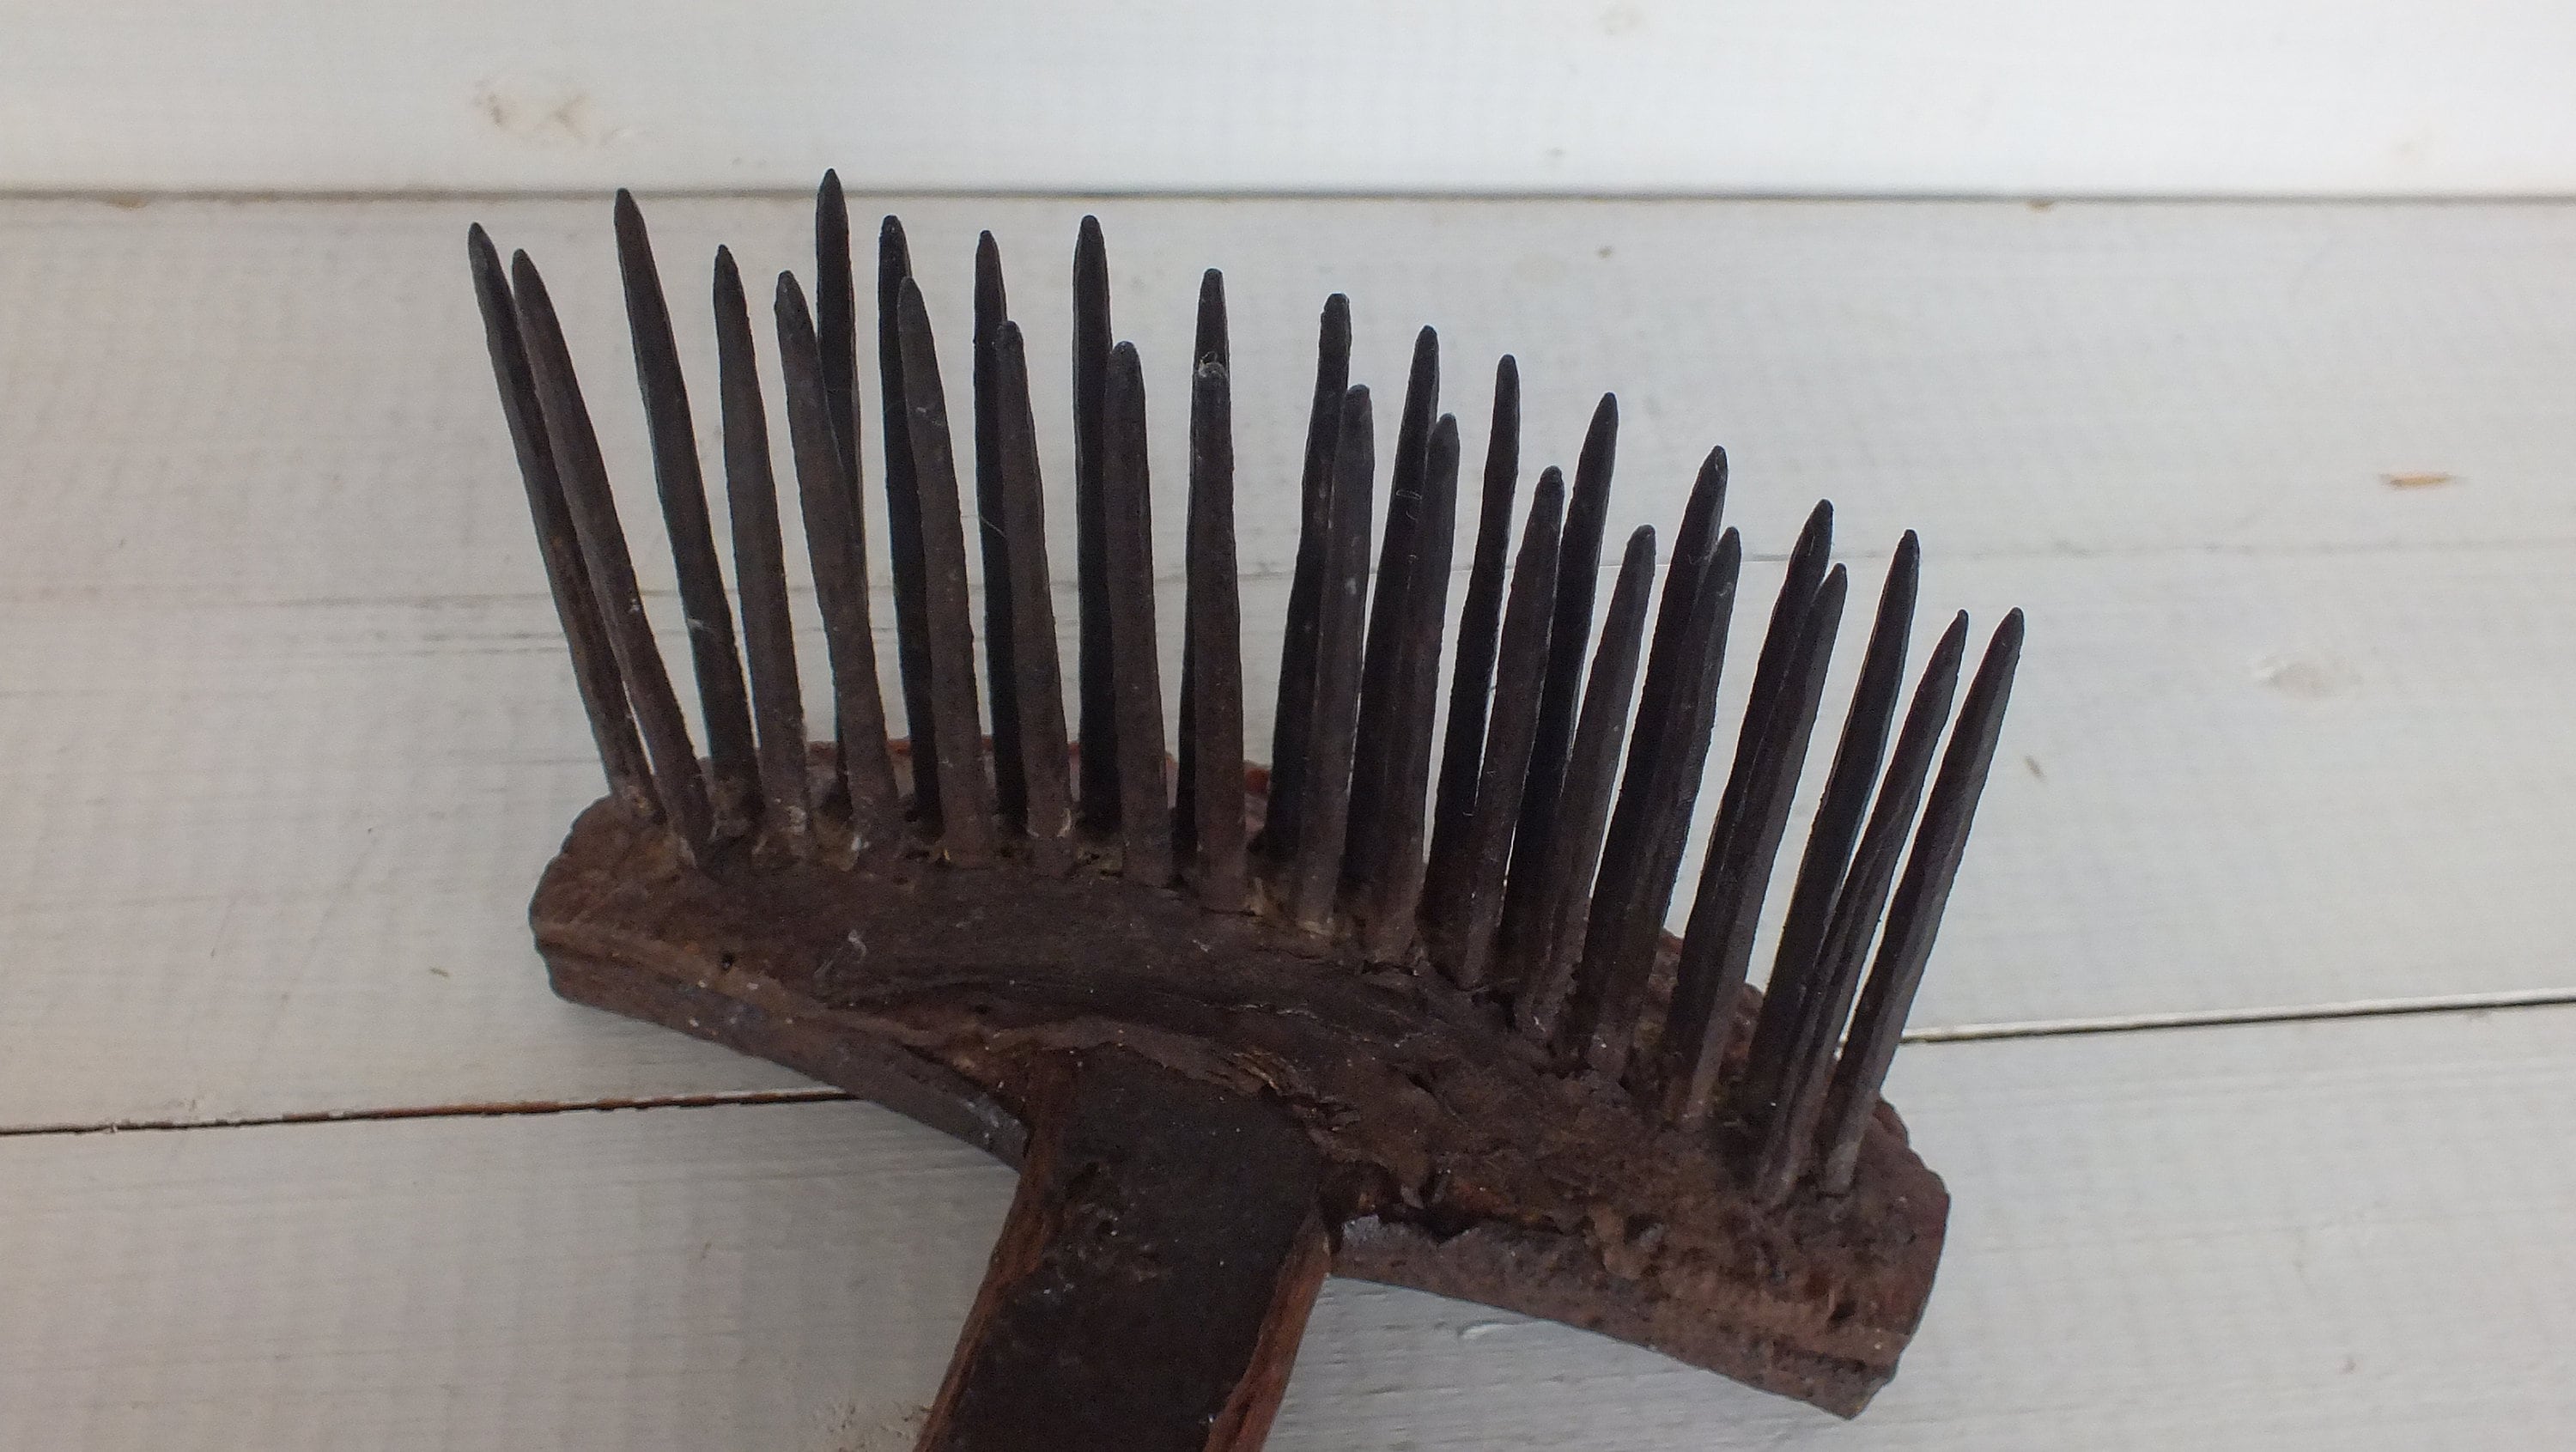 Antique Wool Comb Rare Old Wool Tool Ethnic Wooden Comb Primitive ...